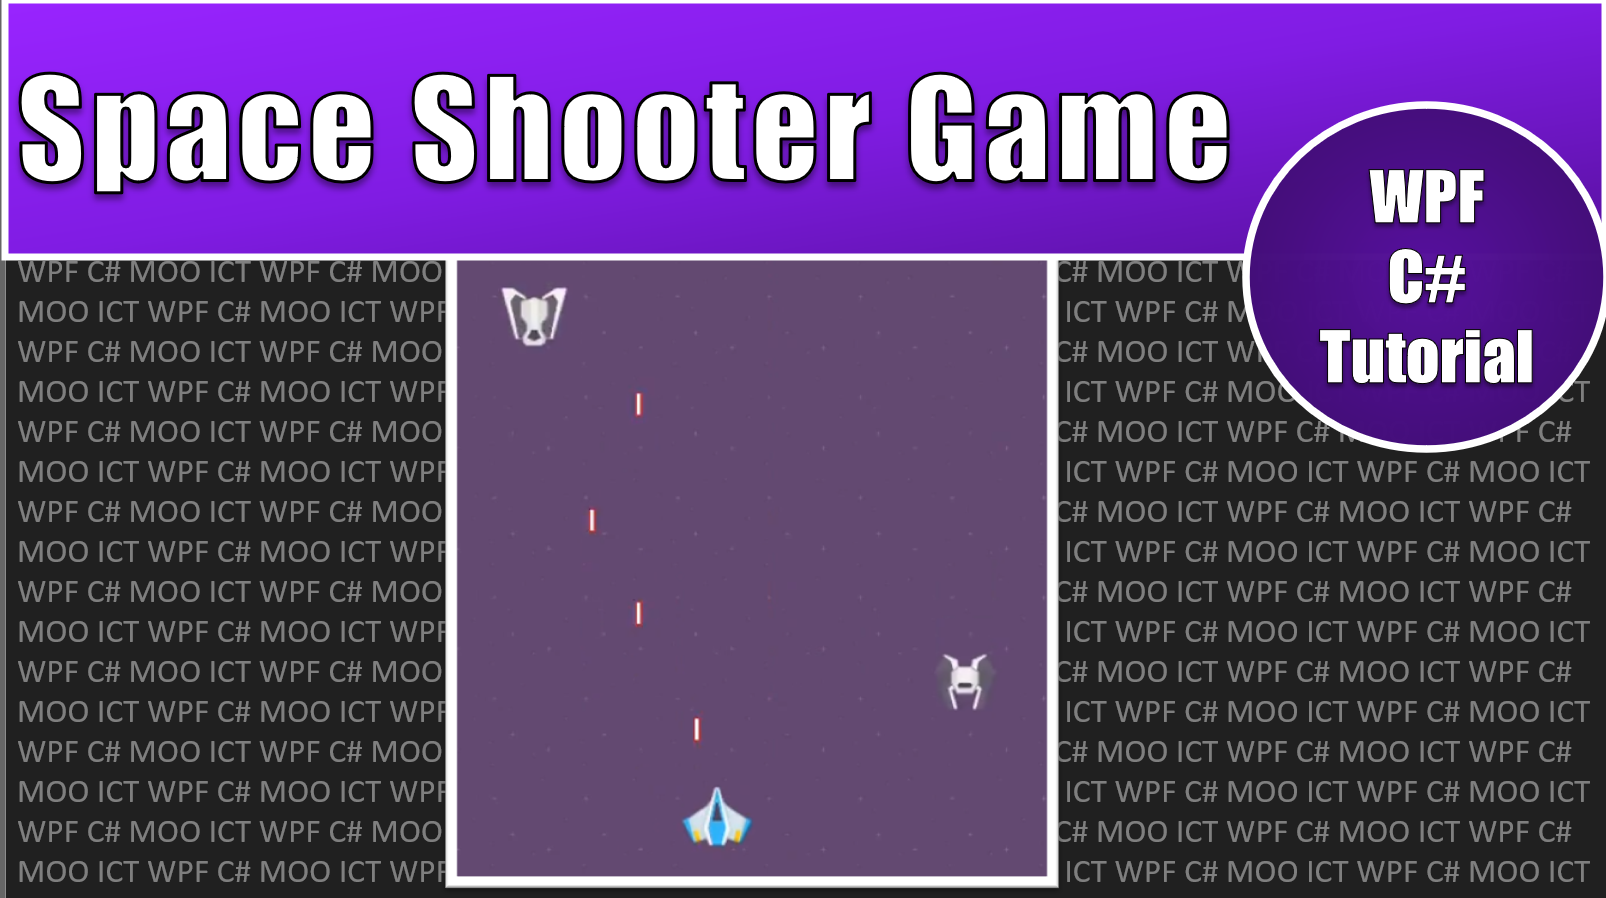 WPF C# Tutorial – Create a space battle shooter game in Visual Studio Moo ICT